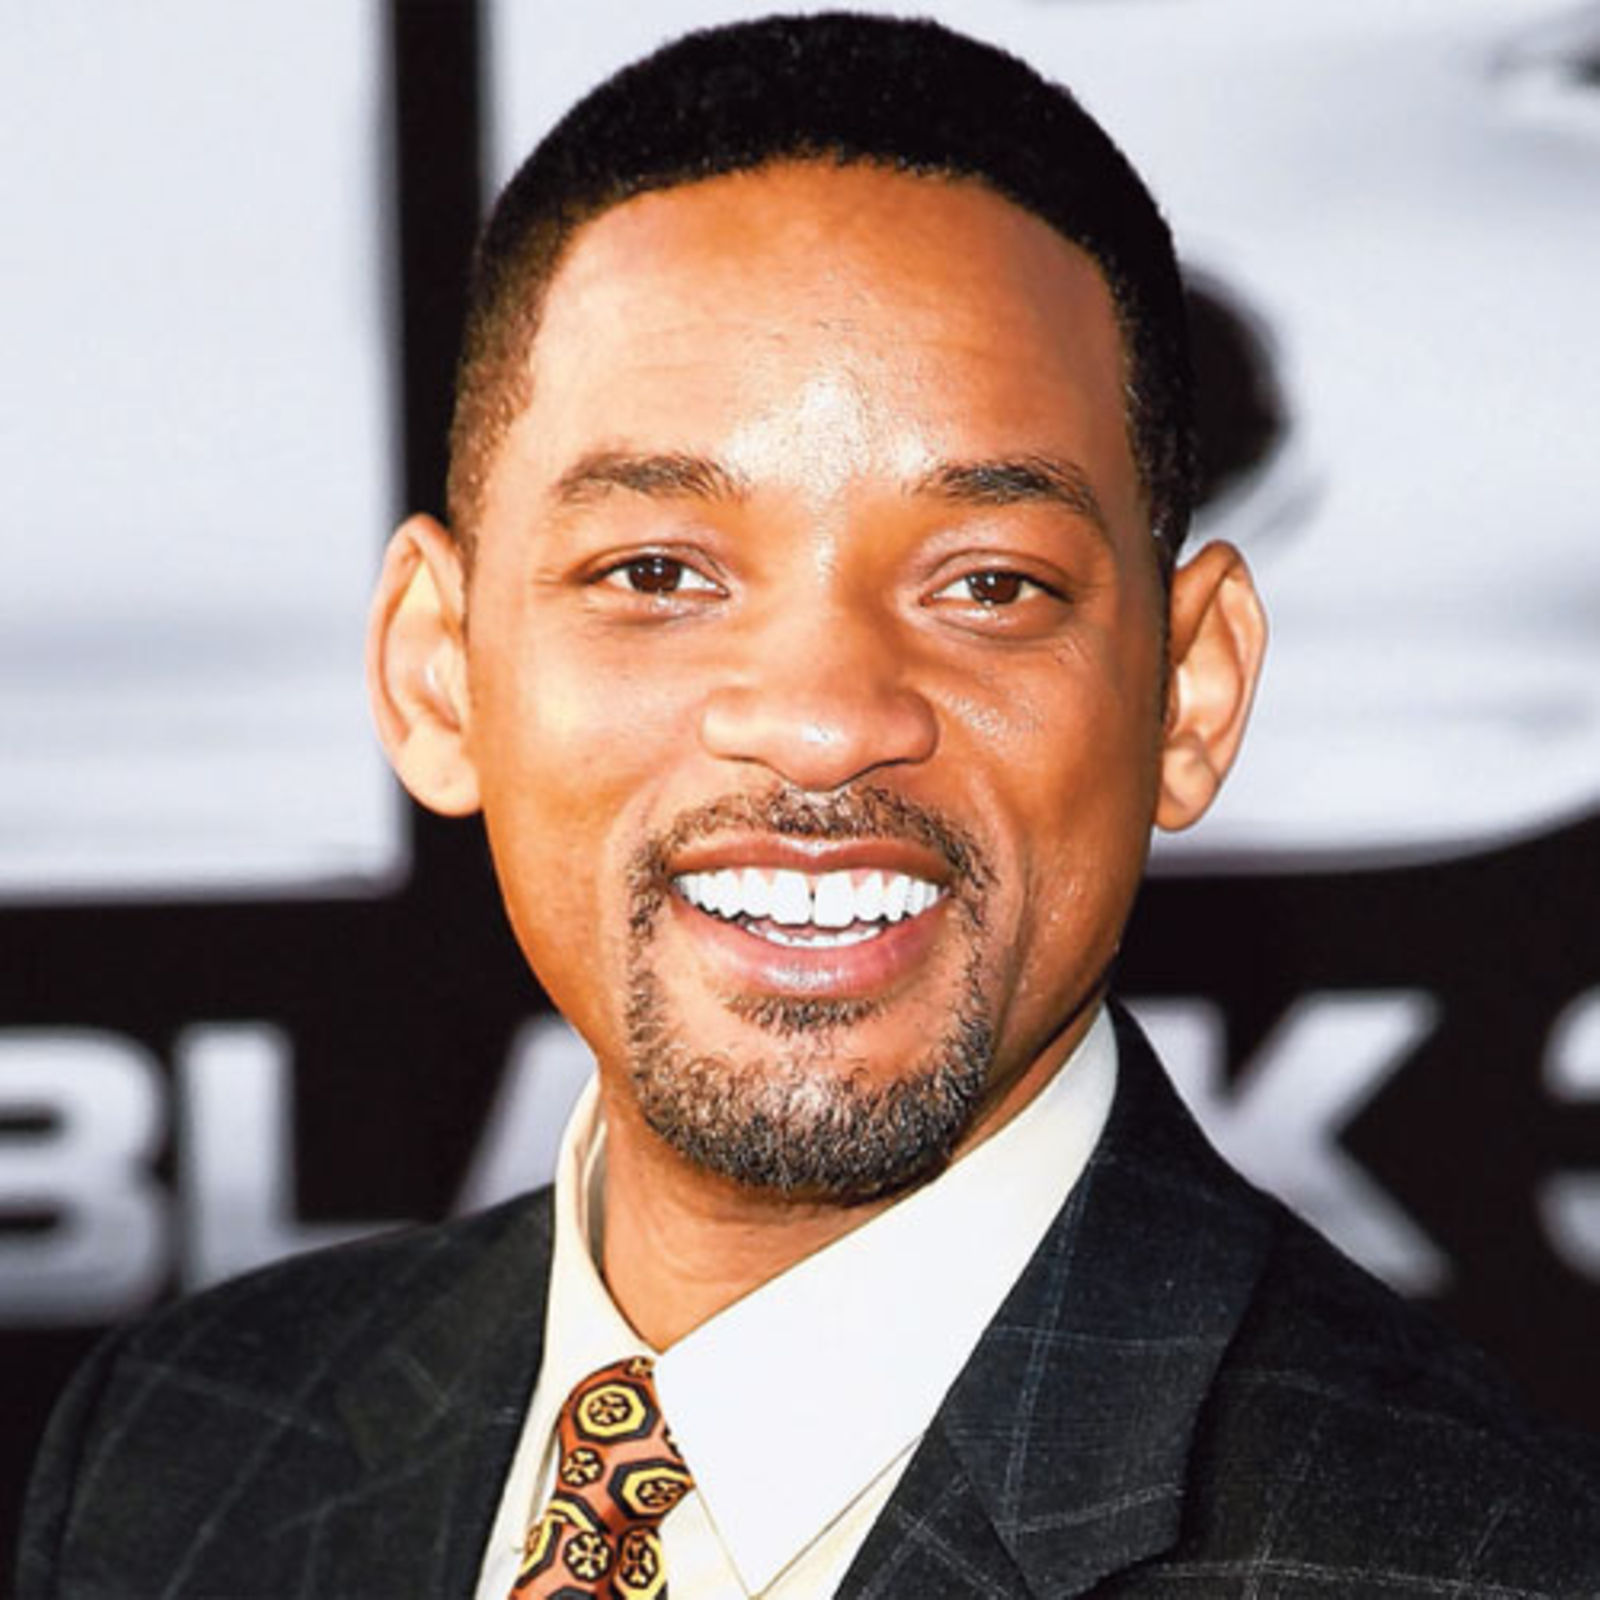 Commentary Will Smith reaction exposes Hollywood biases  The TimesDelphic